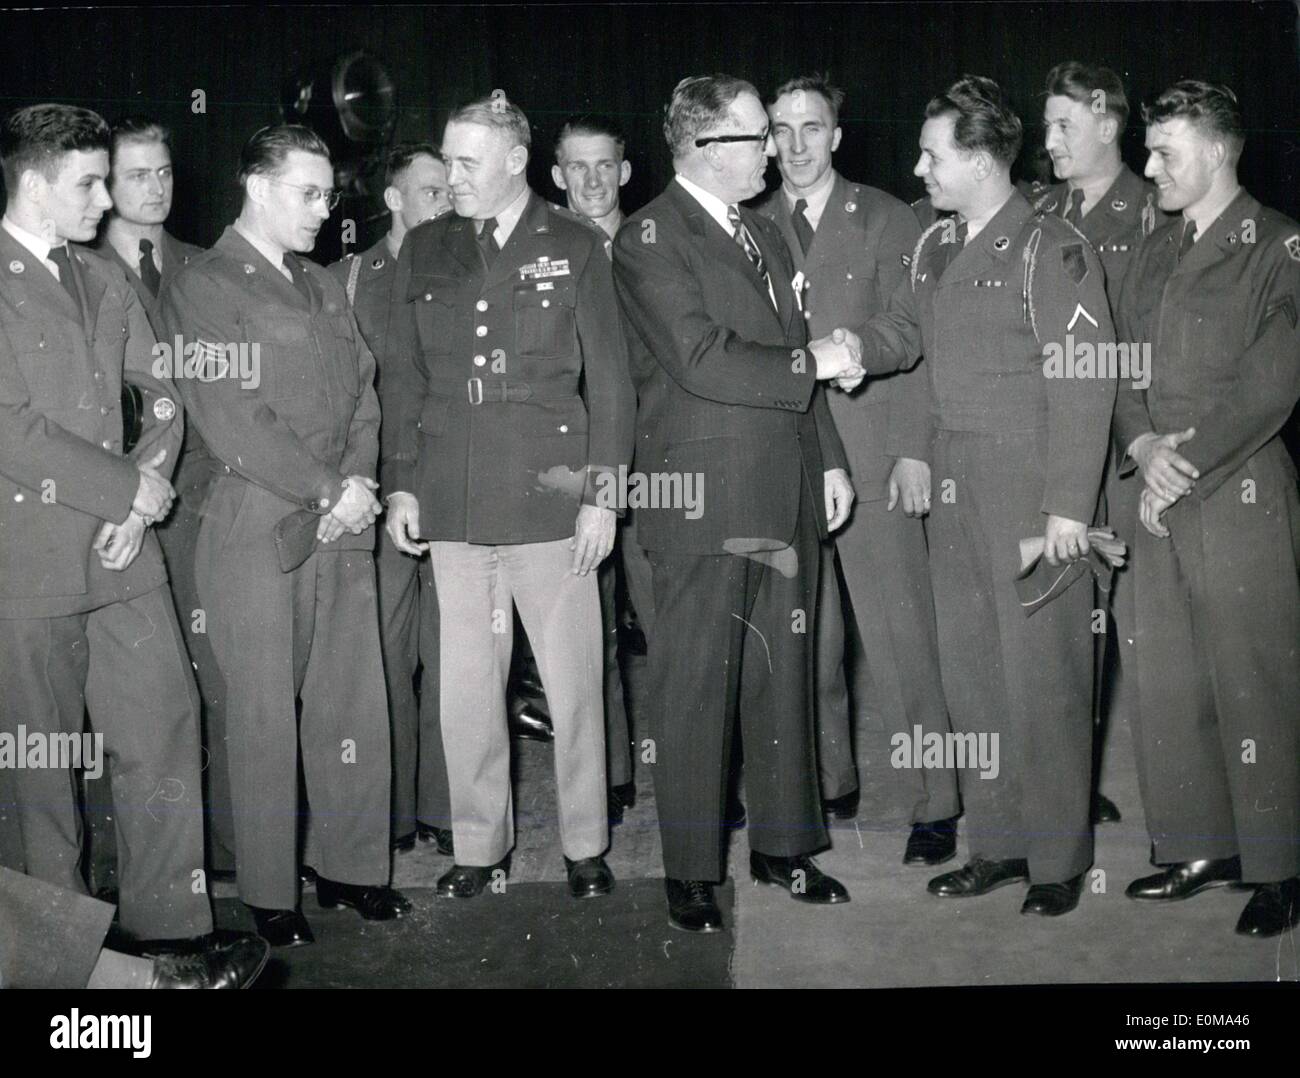 Mar. 09, 1954 - 104 US soldiers from 34 different countries who had immigrated to the US received their US citizenship in a Frankfurt barrack, including 13 Germans. Pictured here is US General Major Herren and Mr. Argyle R. Mackey, who deals with naturalization of citizens, as well as the newly-minted German-Americans. Stock Photo